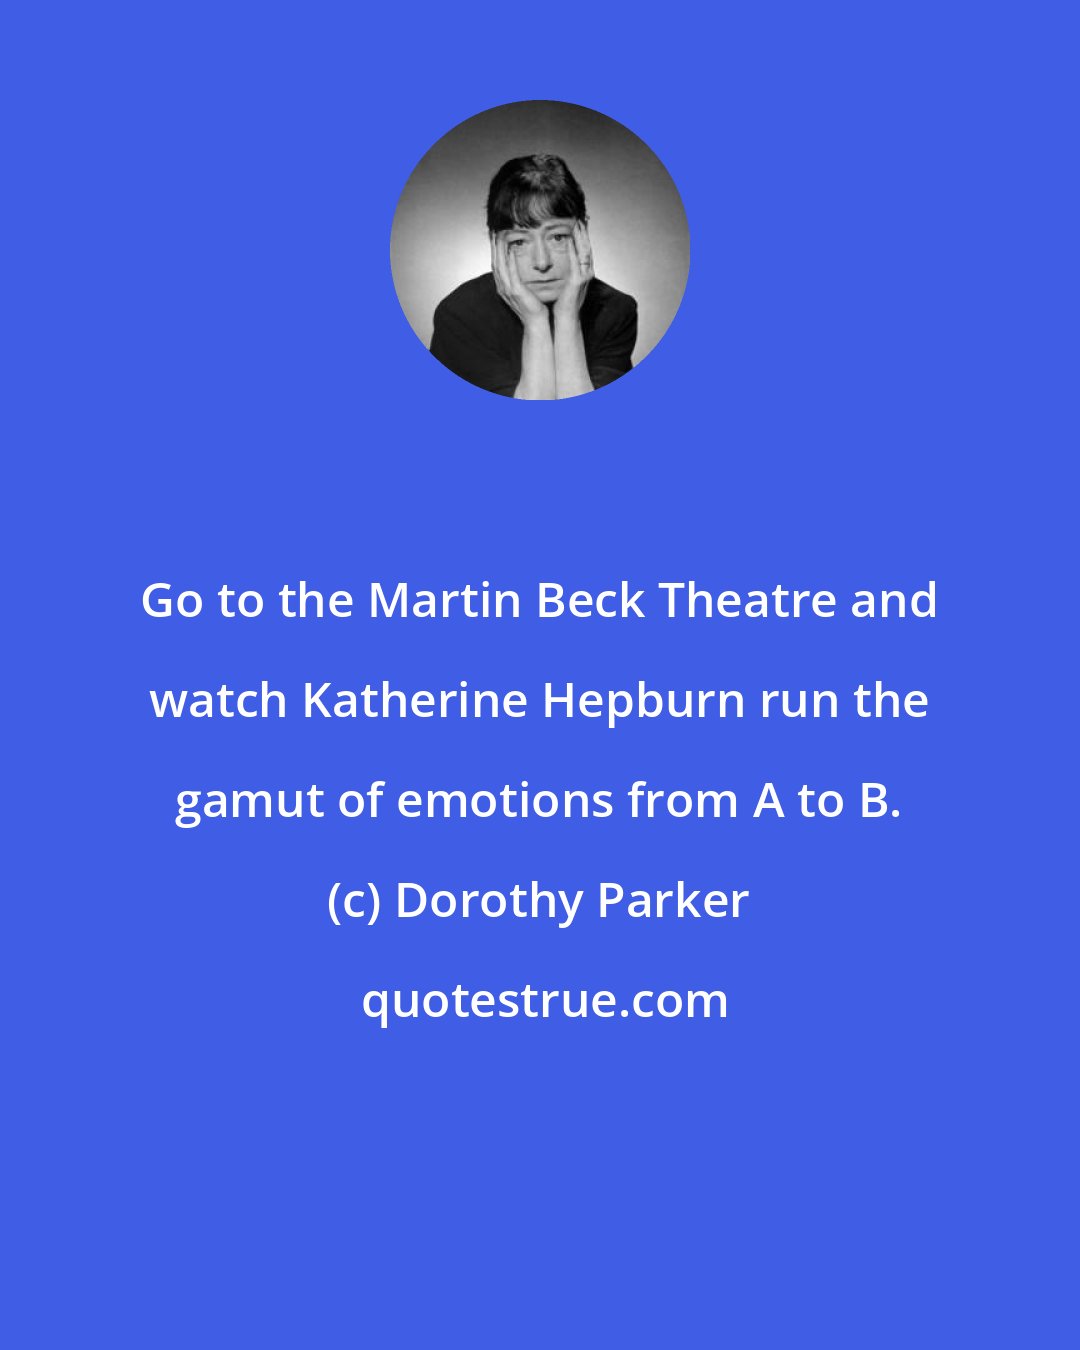 Dorothy Parker: Go to the Martin Beck Theatre and watch Katherine Hepburn run the gamut of emotions from A to B.